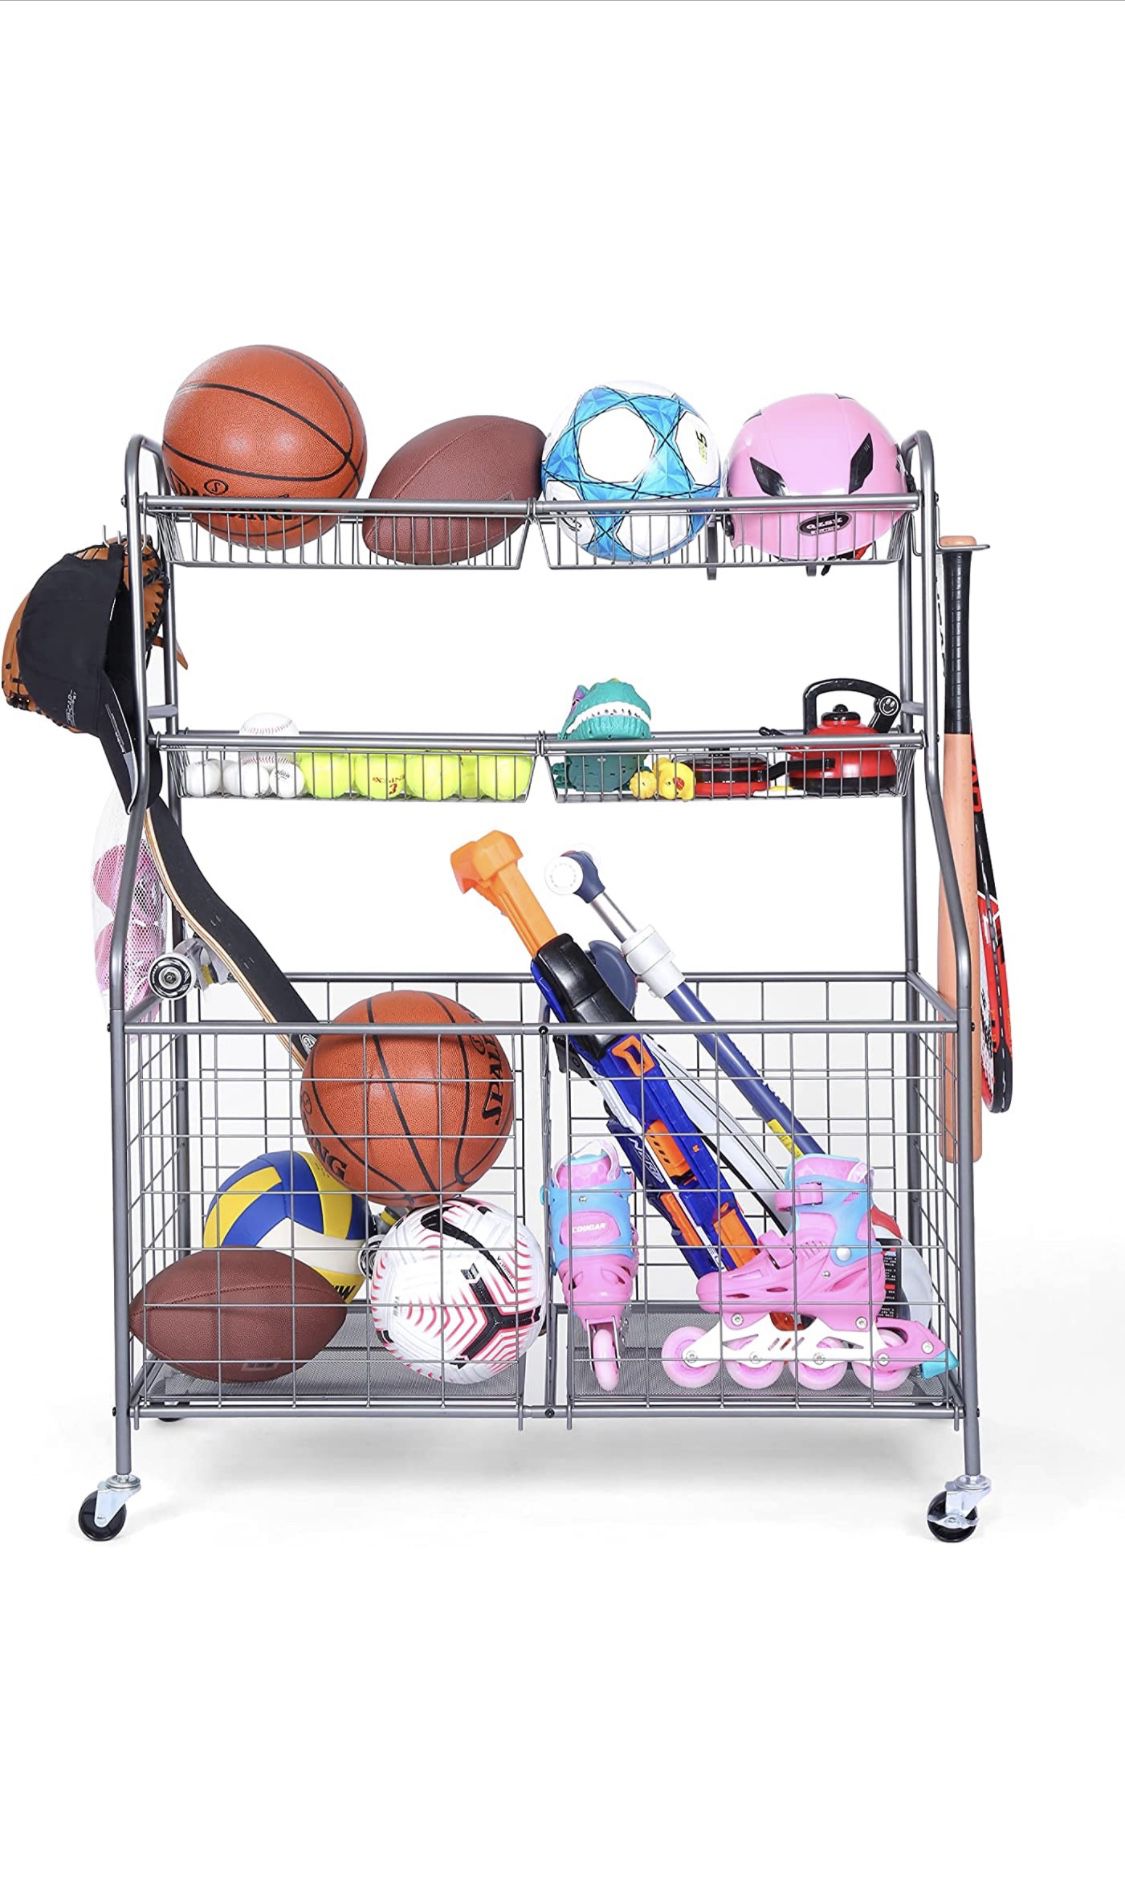 Garage Sports Equipment Storage Organizer with Baskets and Hooks - Easy to Assemble - Sports Ball Gear Rack Holds Basketballs, Baseball Bats, Football